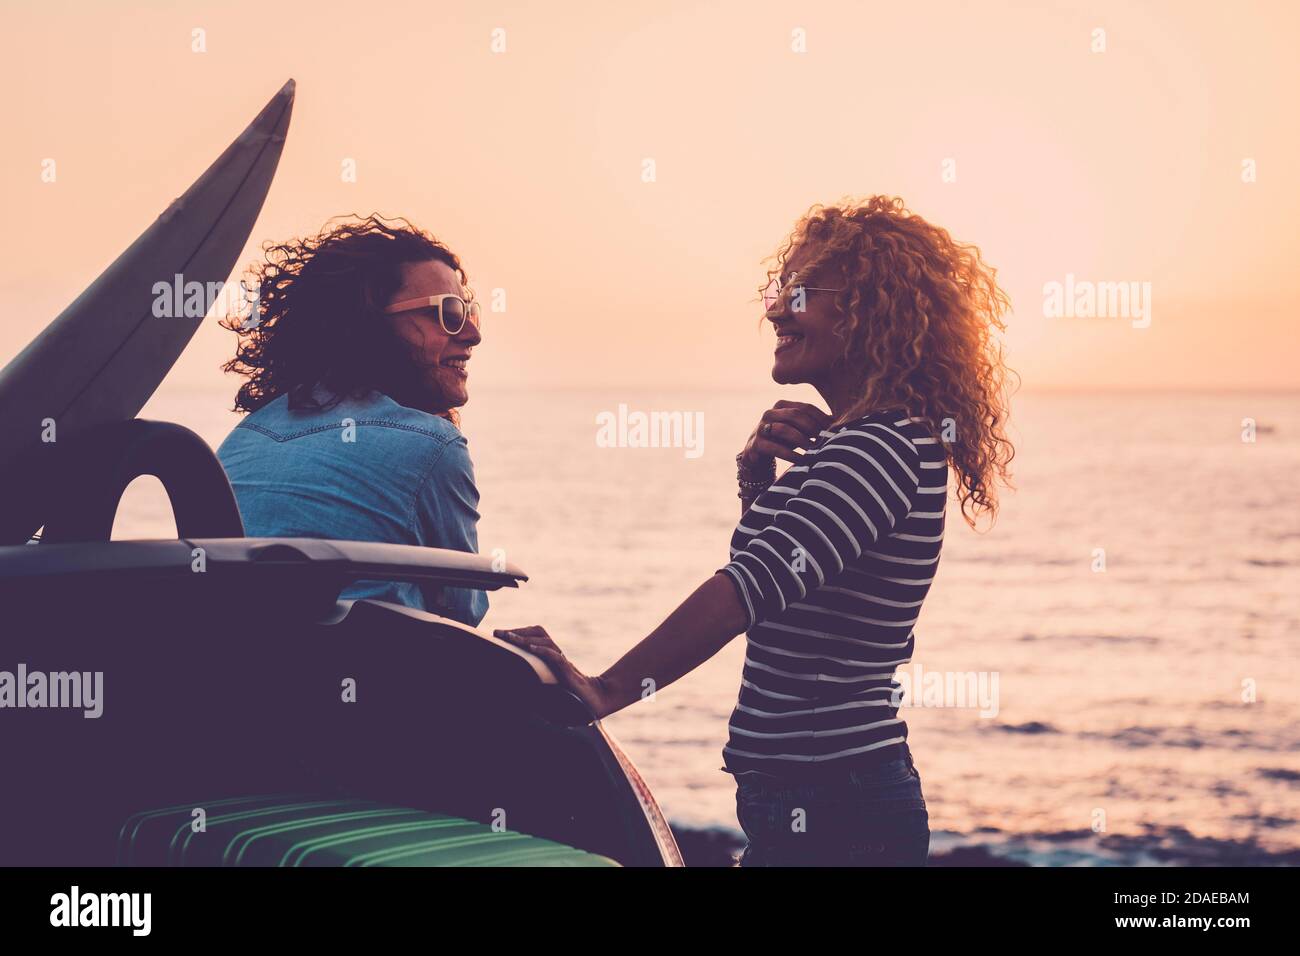 Cheerful and happy couple of women friends enjoying the sunset and travel together for vacation time - sea in background and young middle age enjoyed people near a car and surf table - concept of friendship and travel Stock Photo